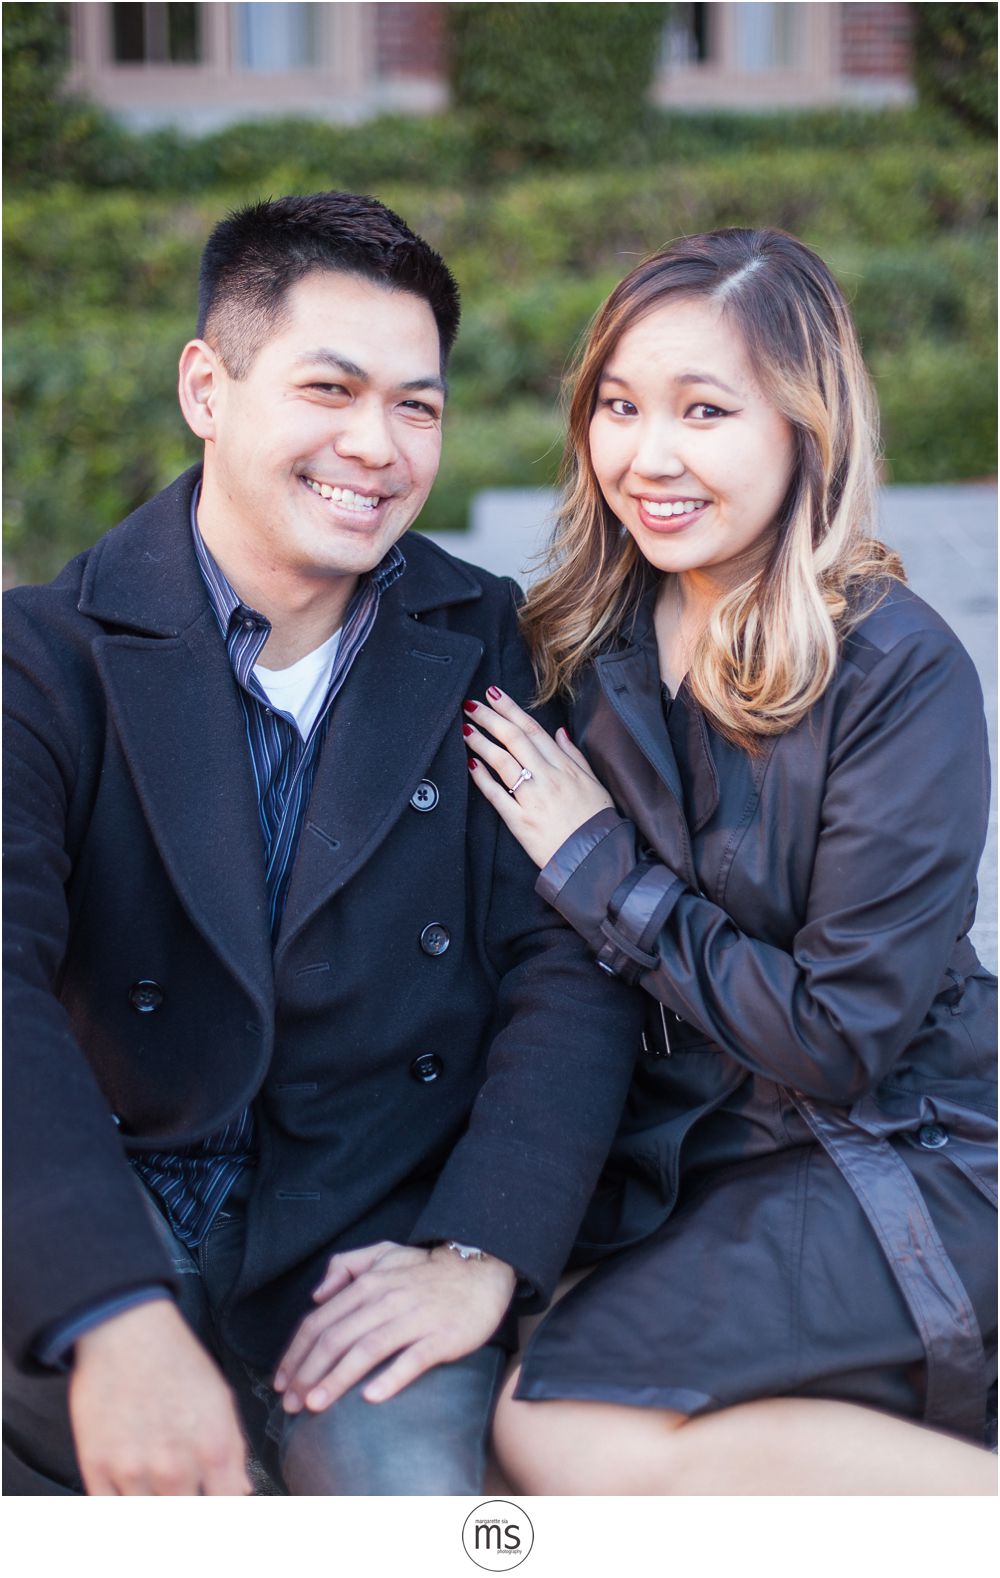 Vincent & Kami's Proposal Story at USC Margarette Sia Photography_0025